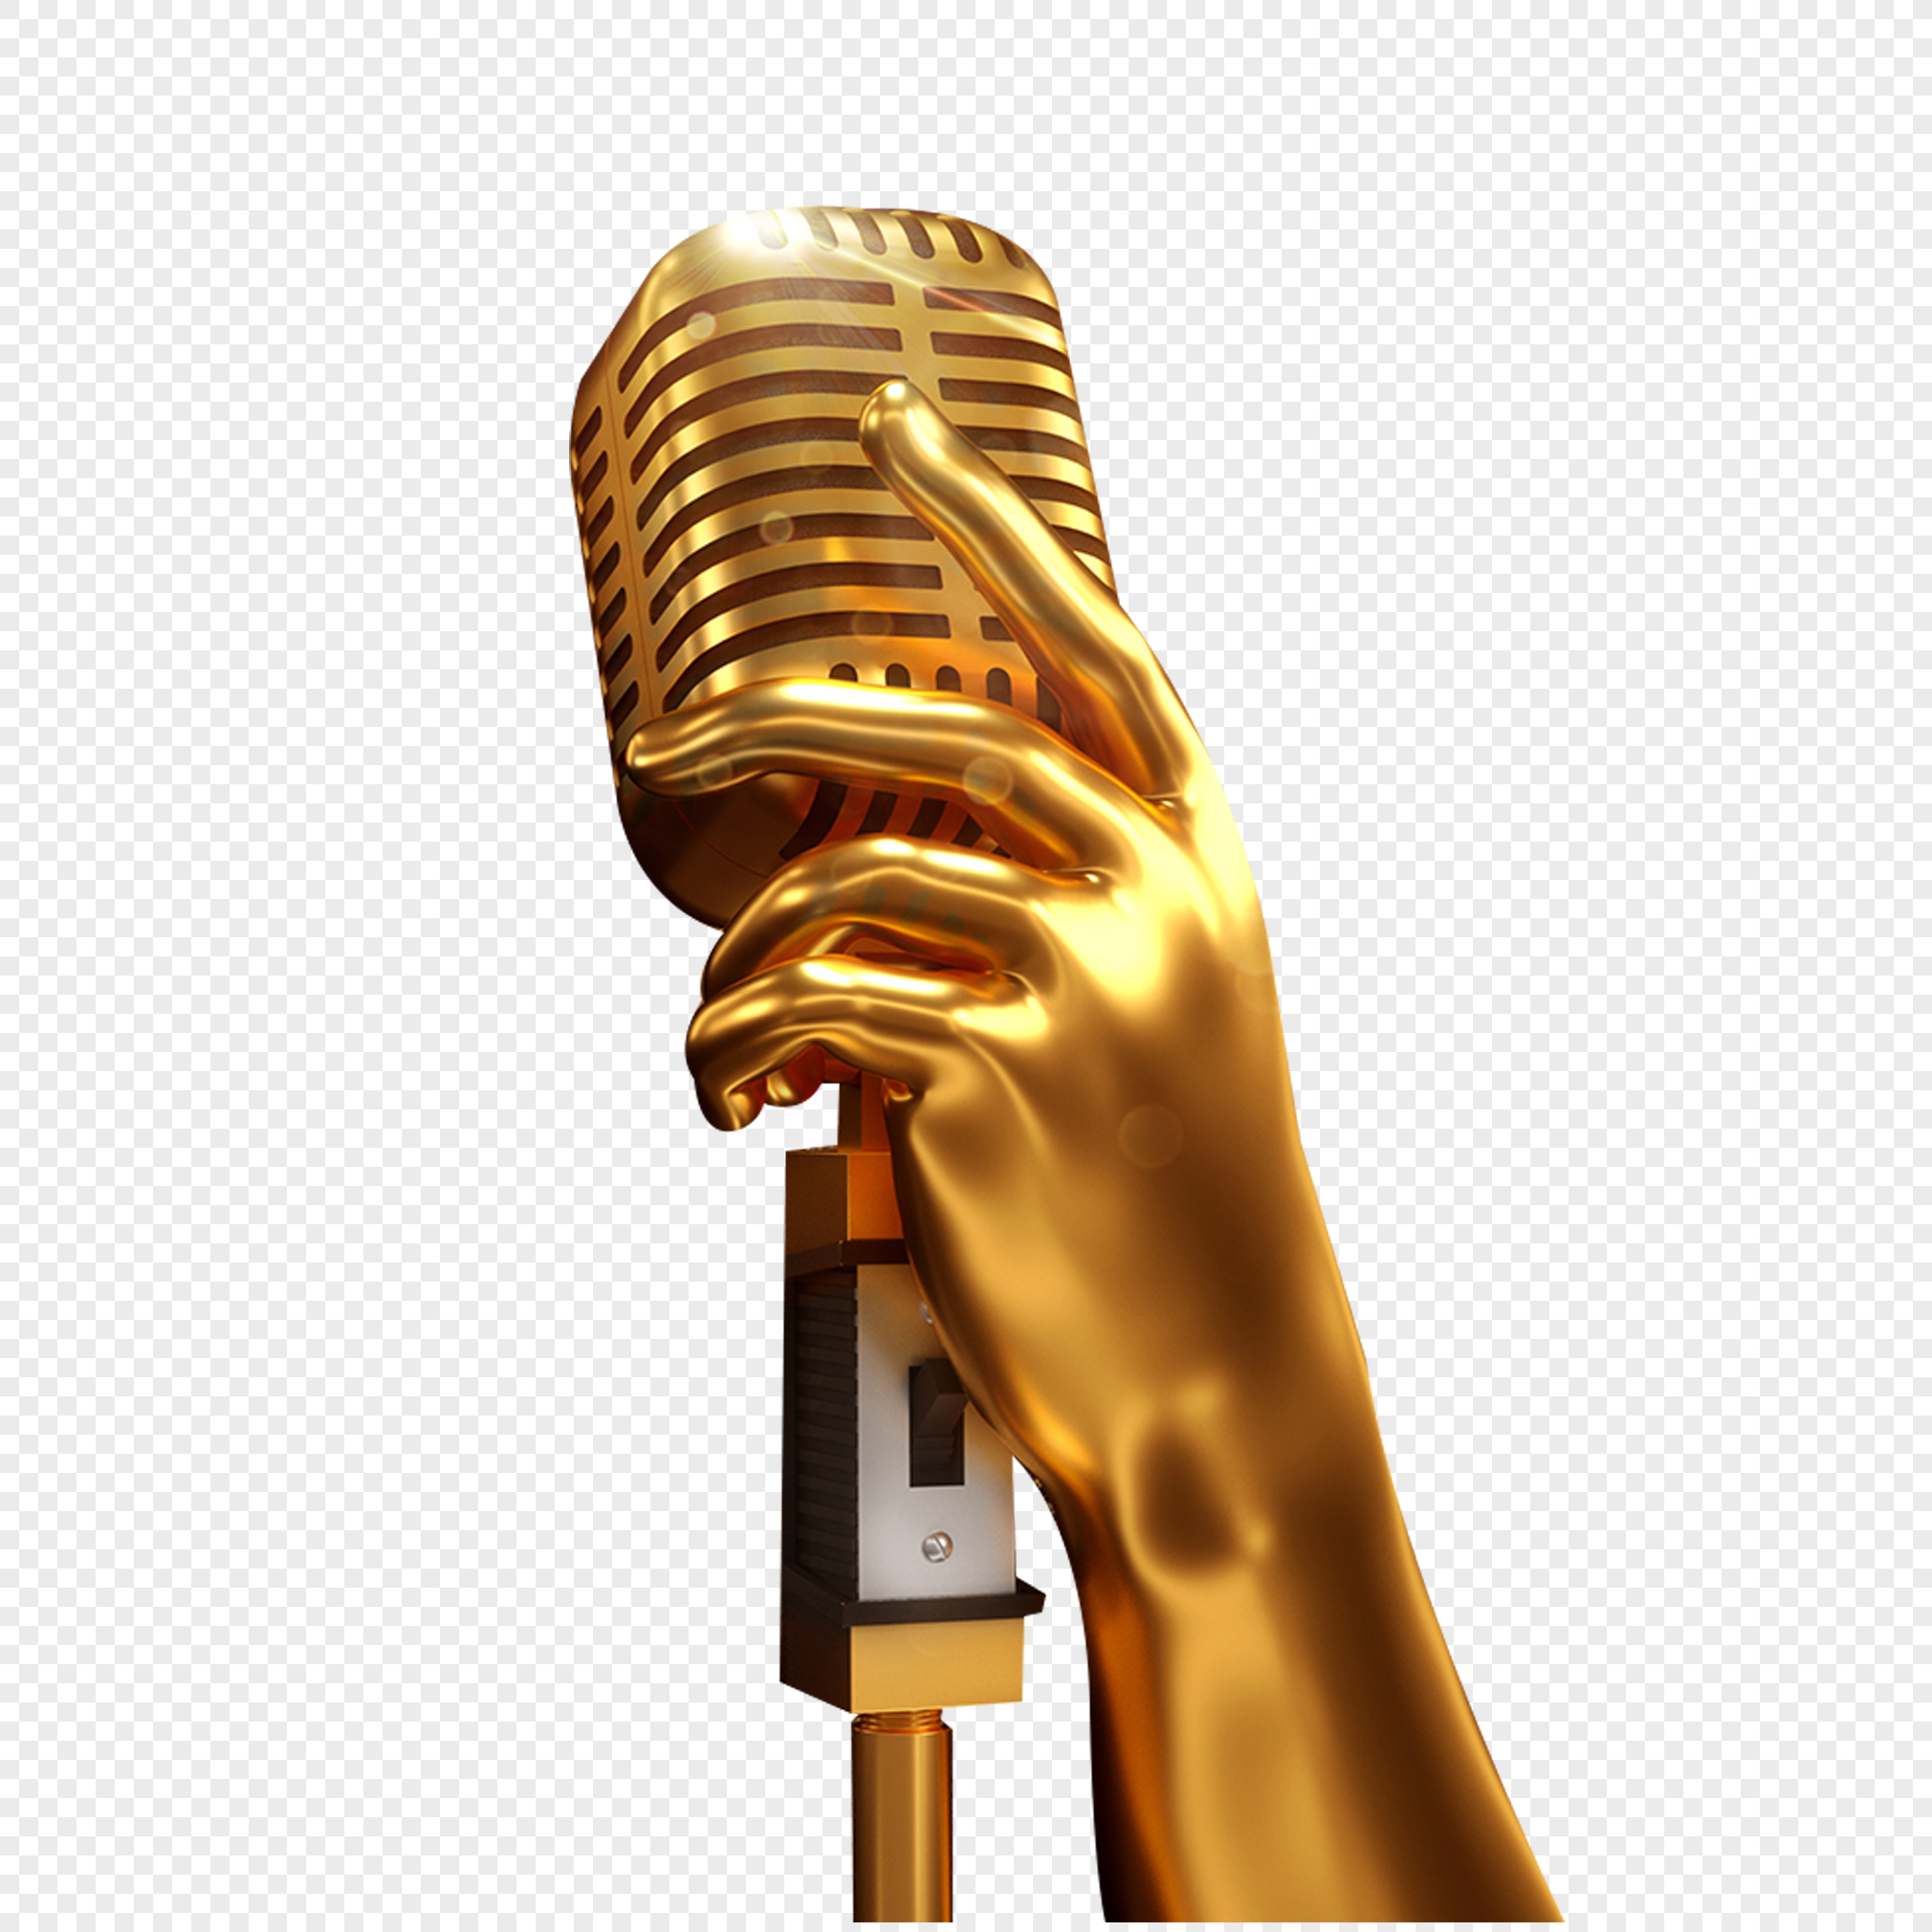 Golden microphone png image_picture free download